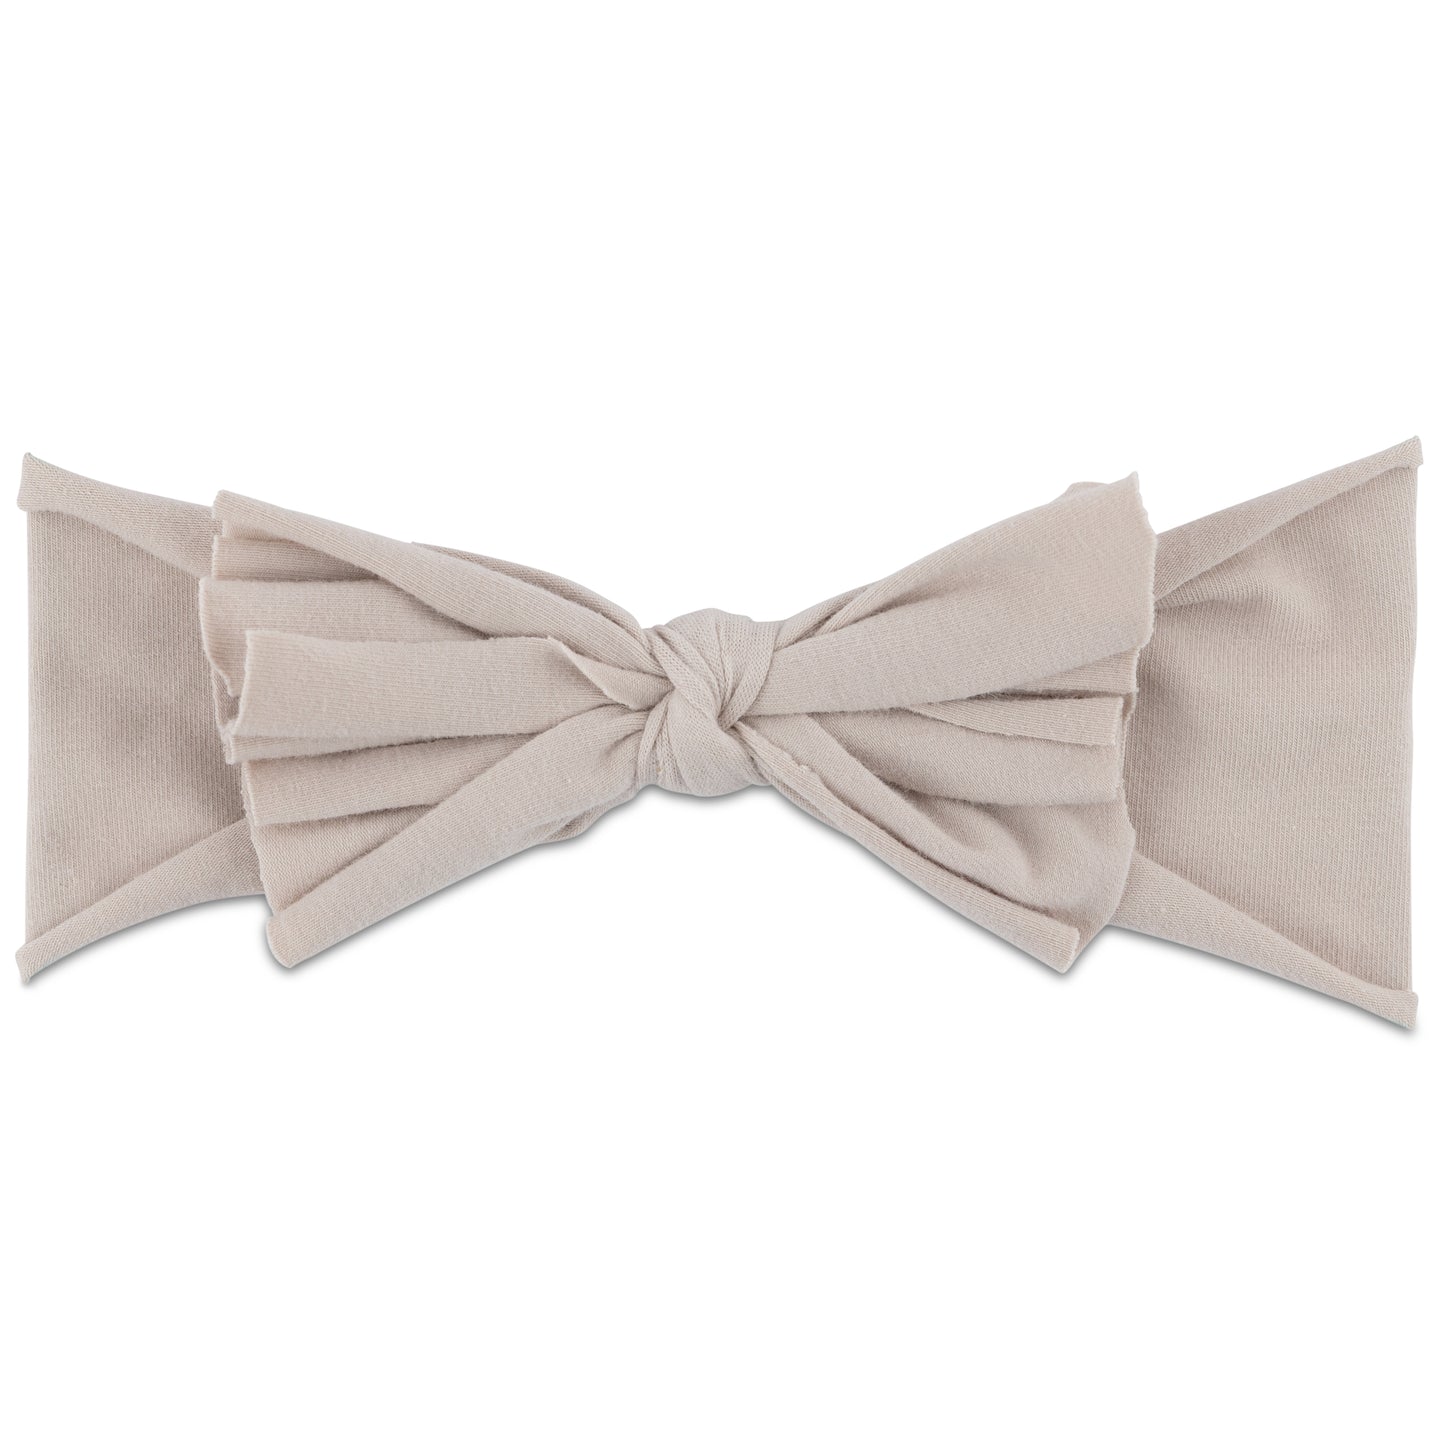 Ely's & Co. Jersey Cotton Bow Headbands